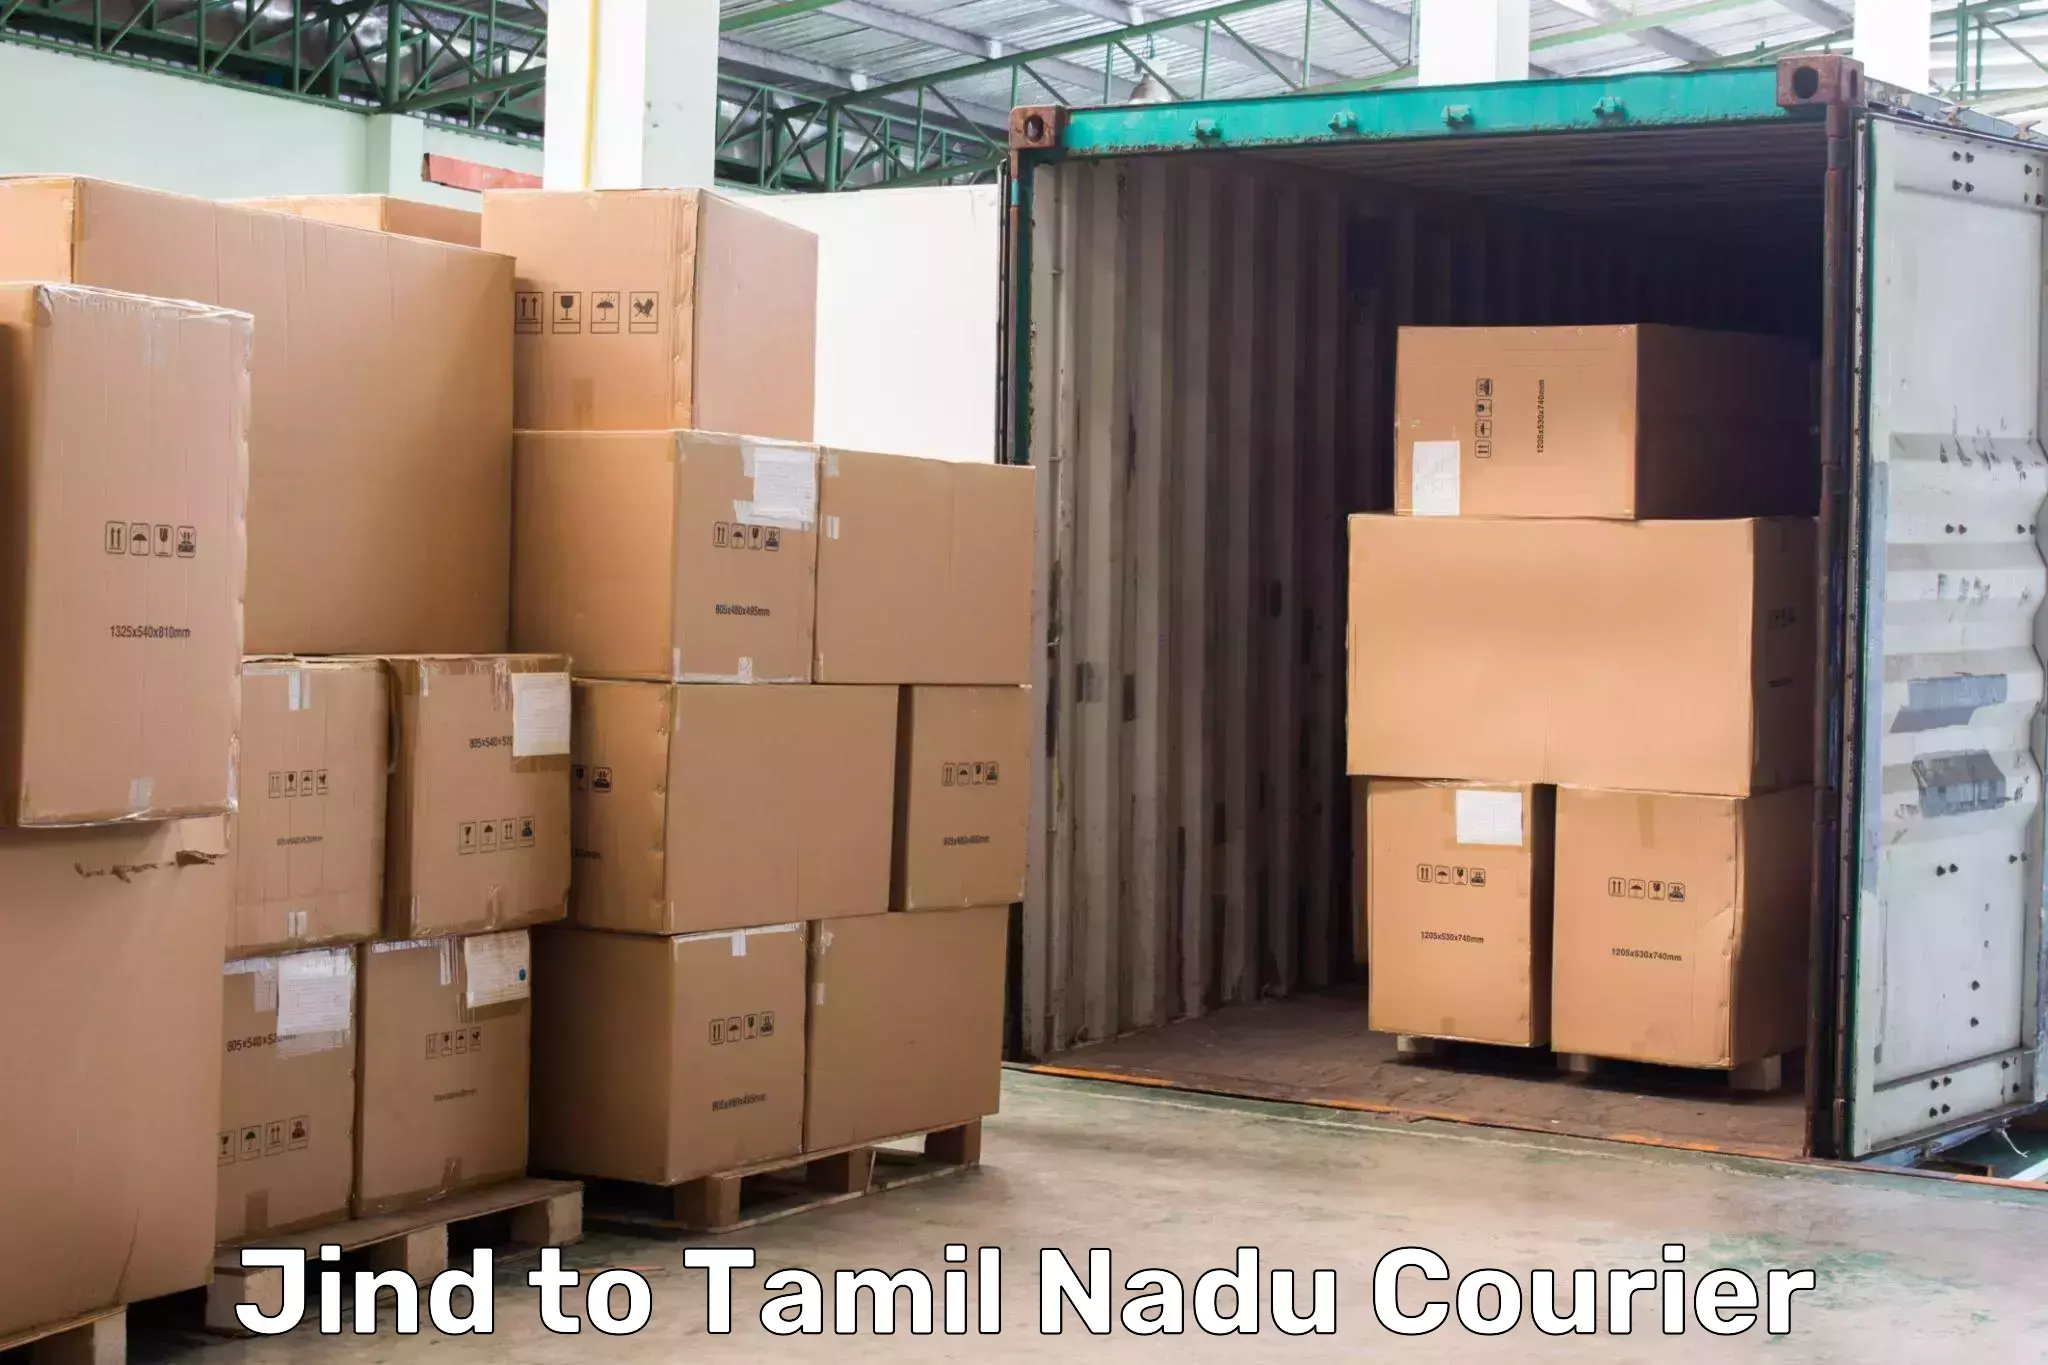 Global courier networks Jind to Thanjavur